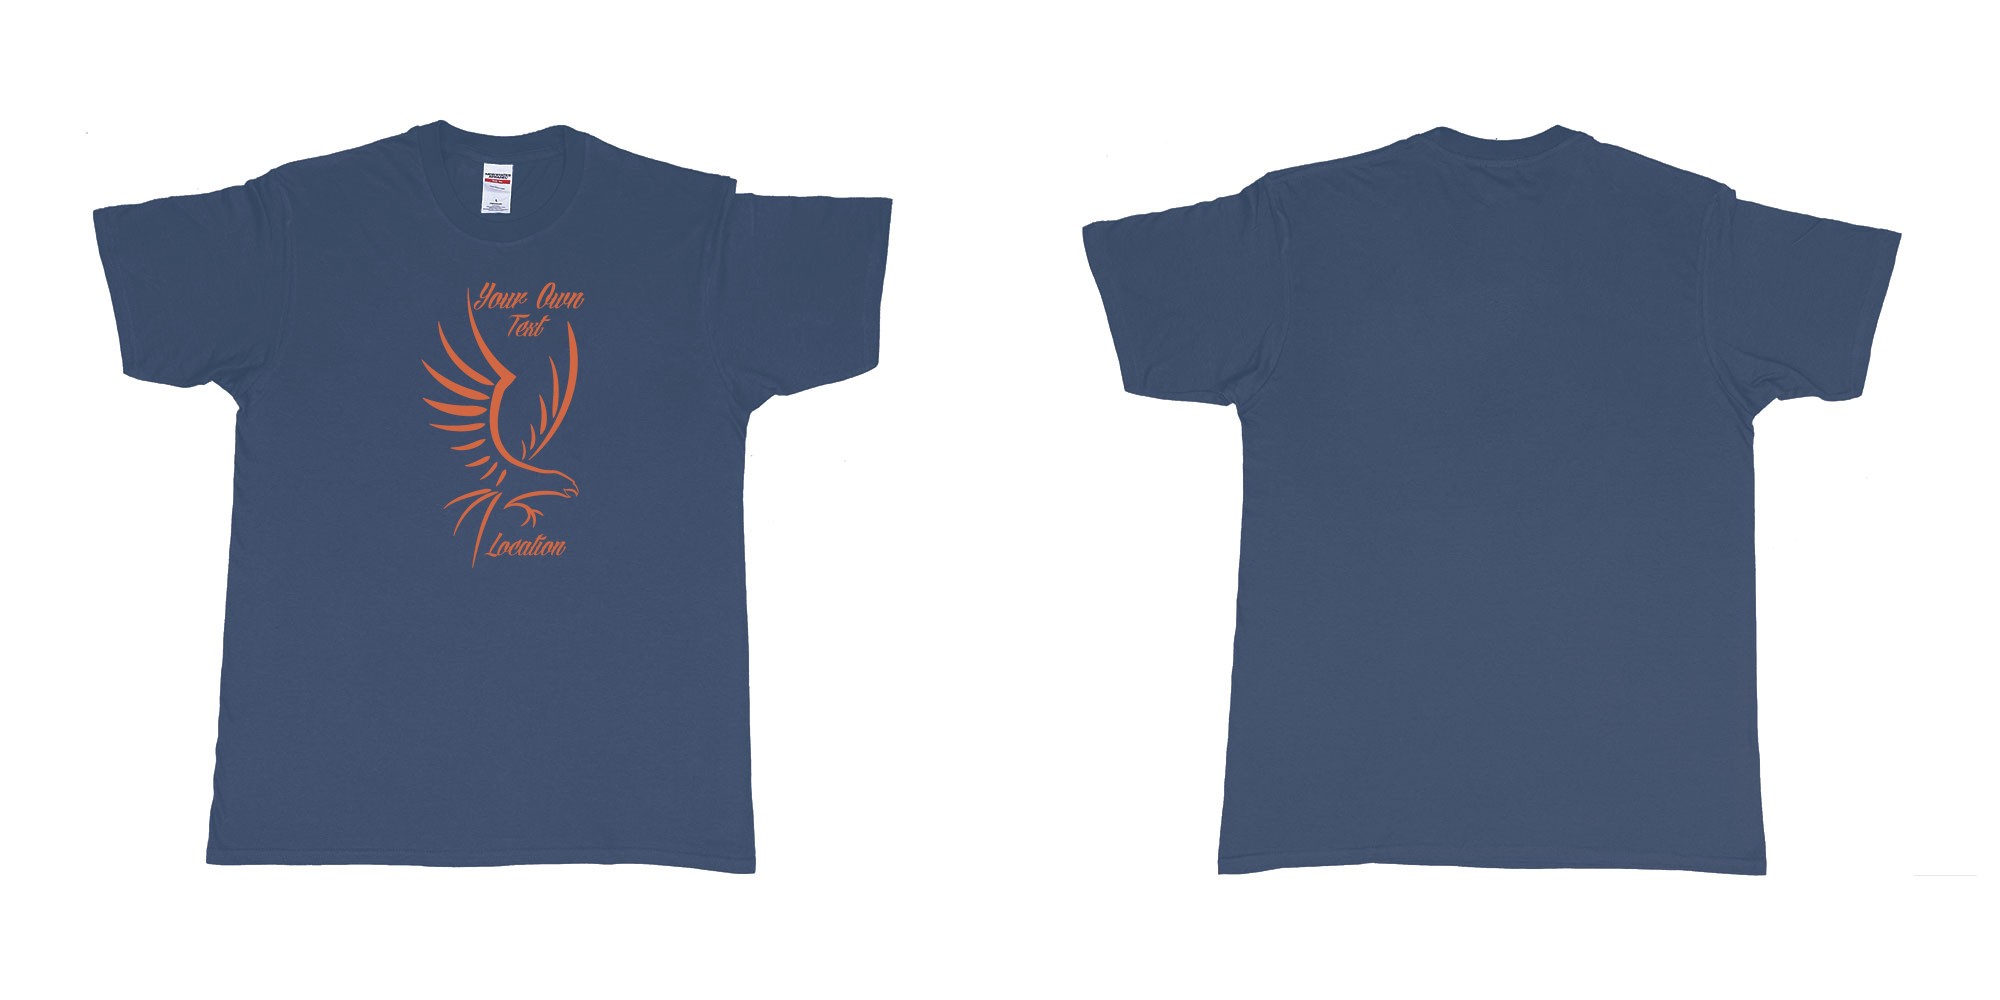 Custom tshirt design custom eagle drawing custom text in fabric color navy choice your own text made in Bali by The Pirate Way